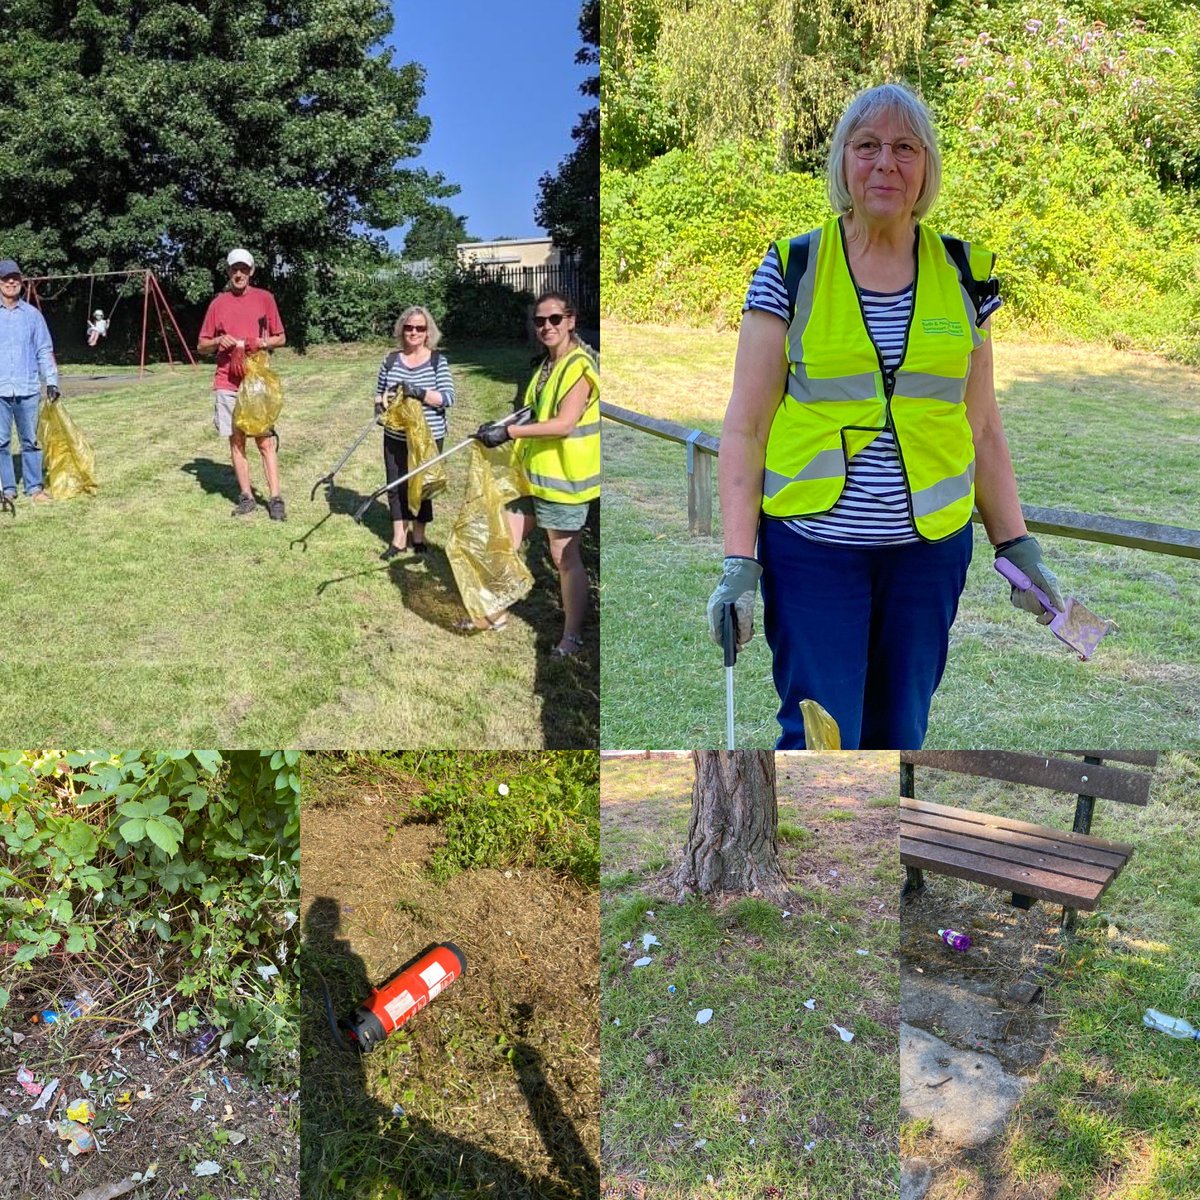 Early morning litter pick with Friends of Sandpits Park this morning. We left it much tidier! Lots of family picnic litter as well as usual energy drinks and beer bottles. #BeKindToYourParks #loveparks #buyitbinit @BathnesParks @bathnes @L8blossom